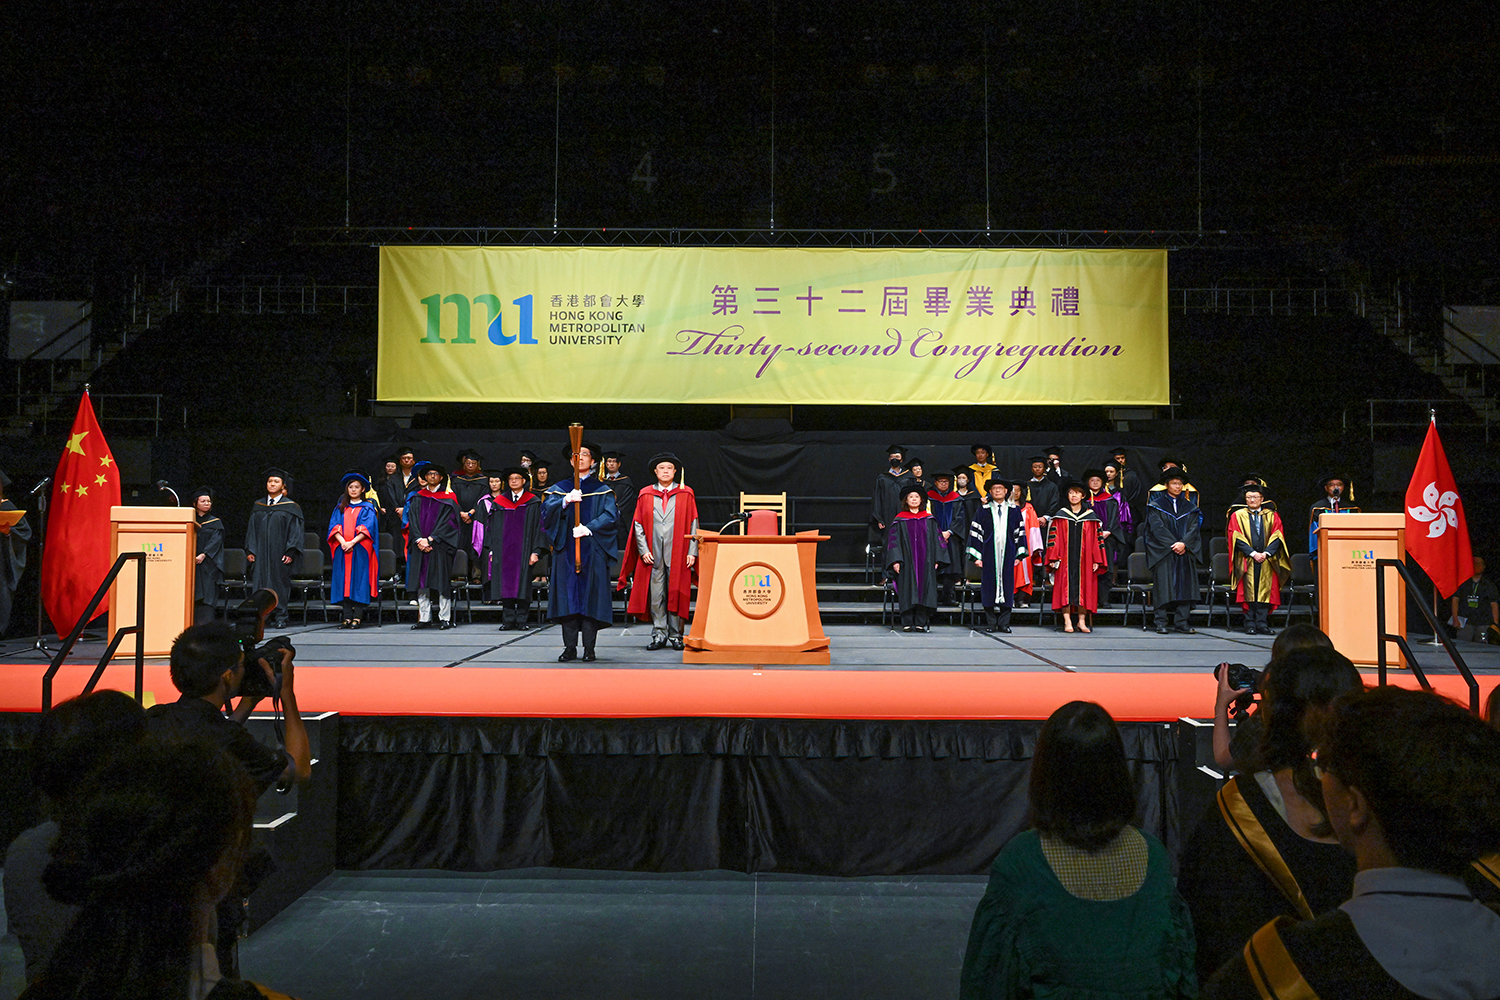 Hong Kong Metropolitan University is currently holding its 32<sup>nd</sup> Summer Congregation.